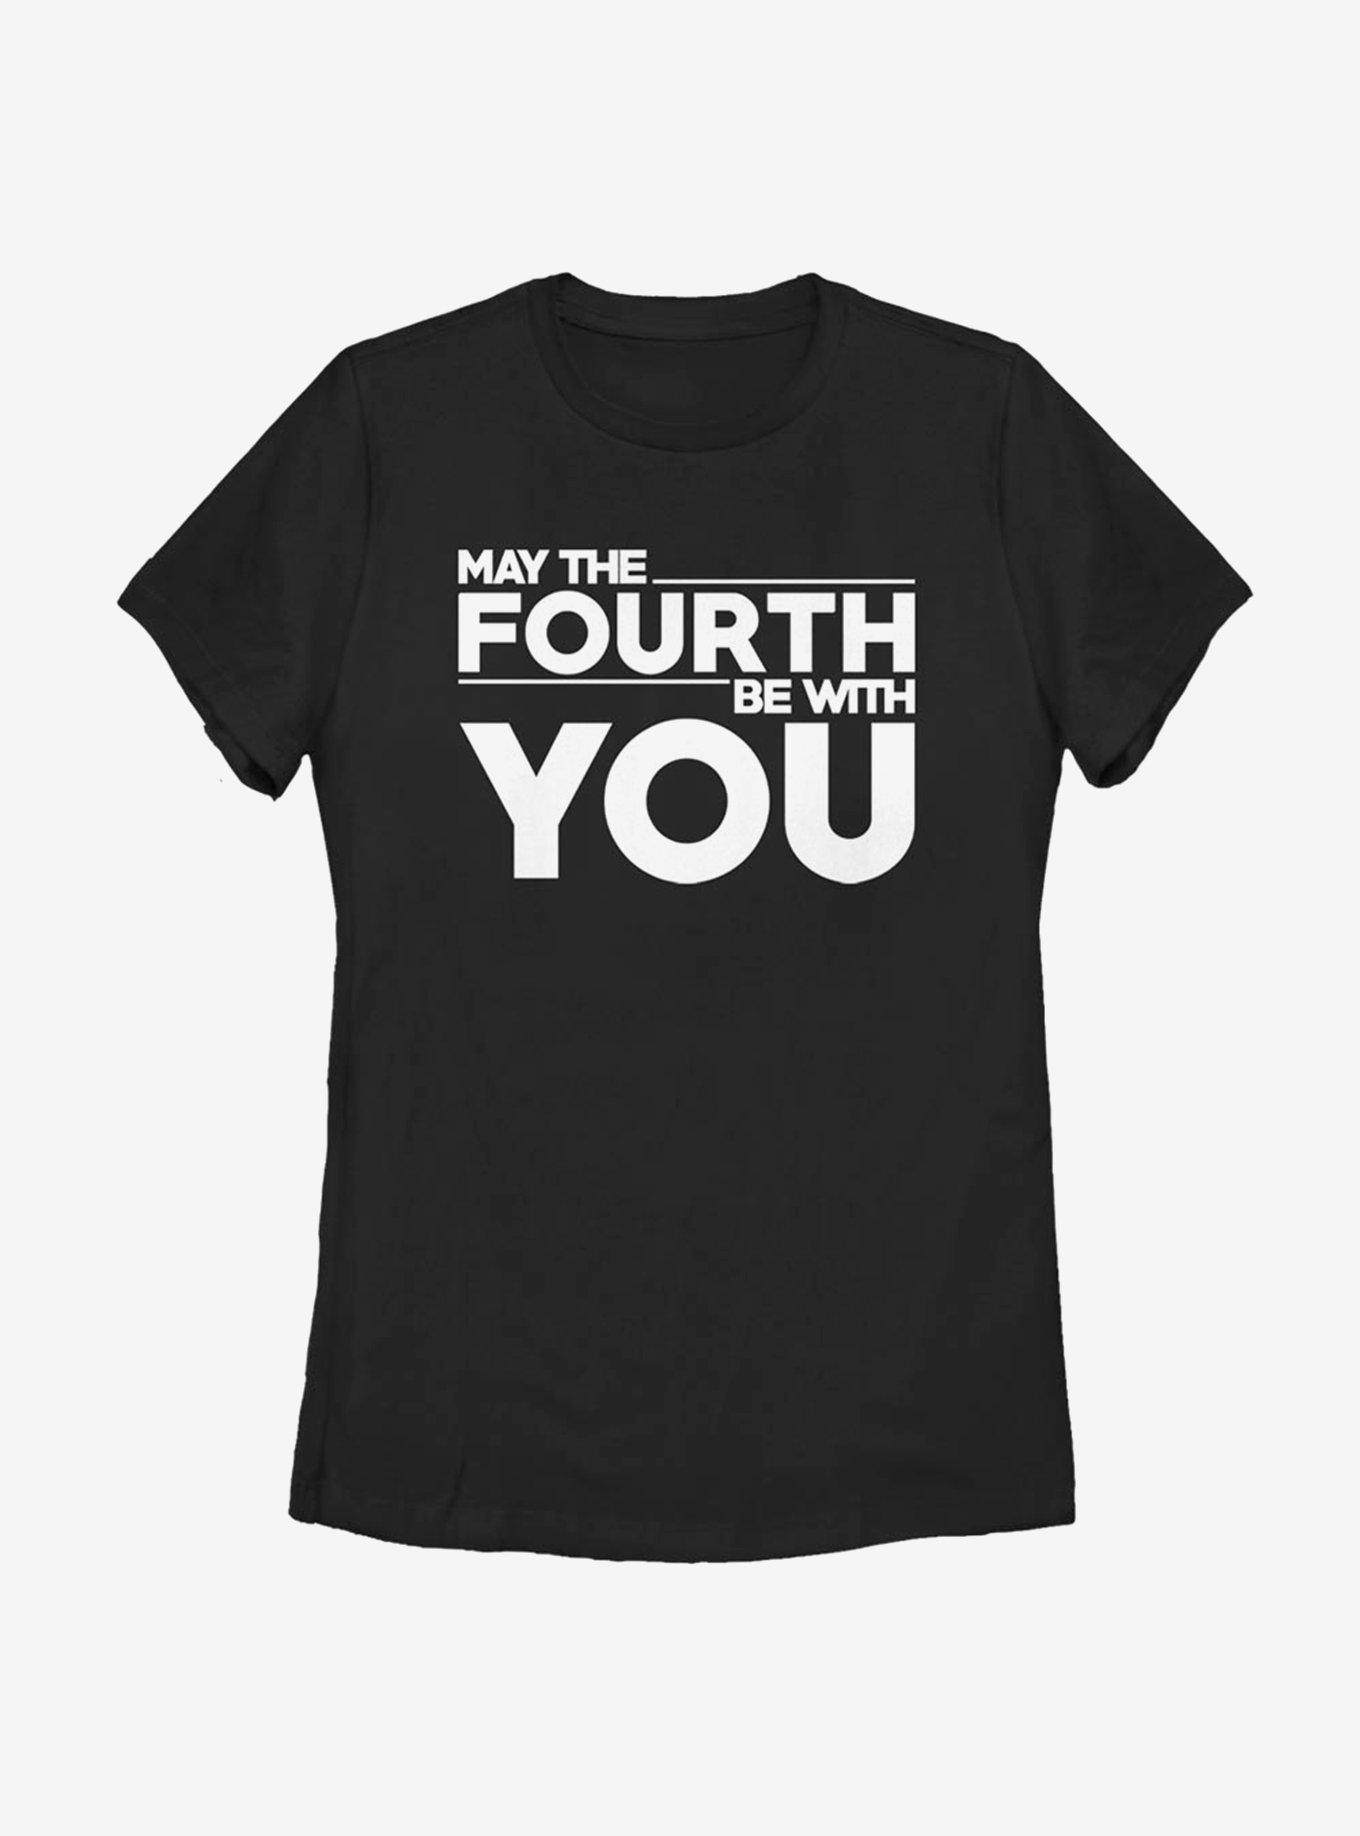 Star Wars May The Fourth Be With You White Letters Womens T-Shirt, BLACK, hi-res